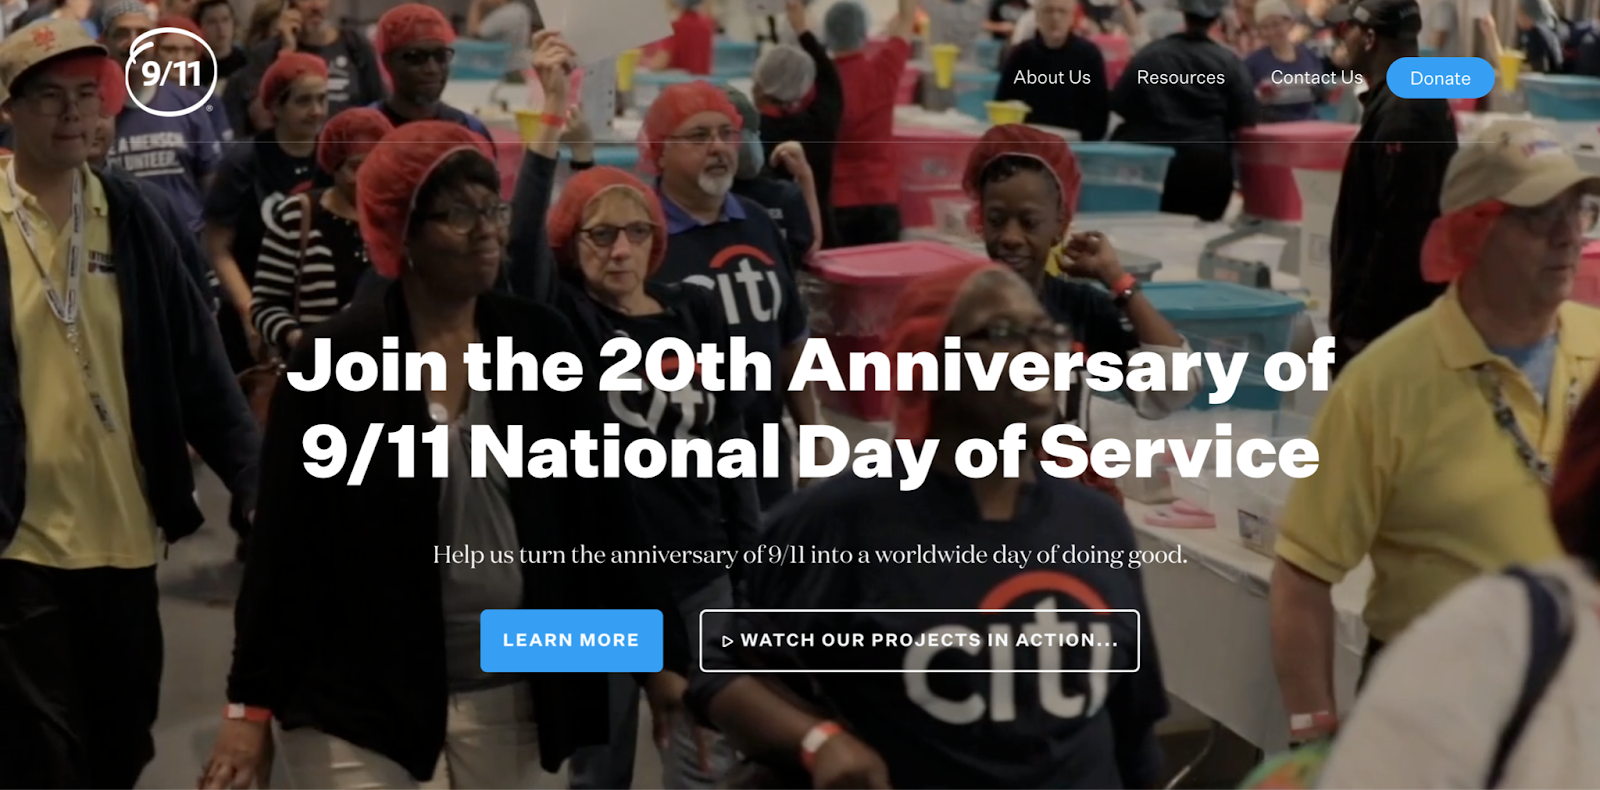 A big section with a video on the 911day.org website, built in Droopler